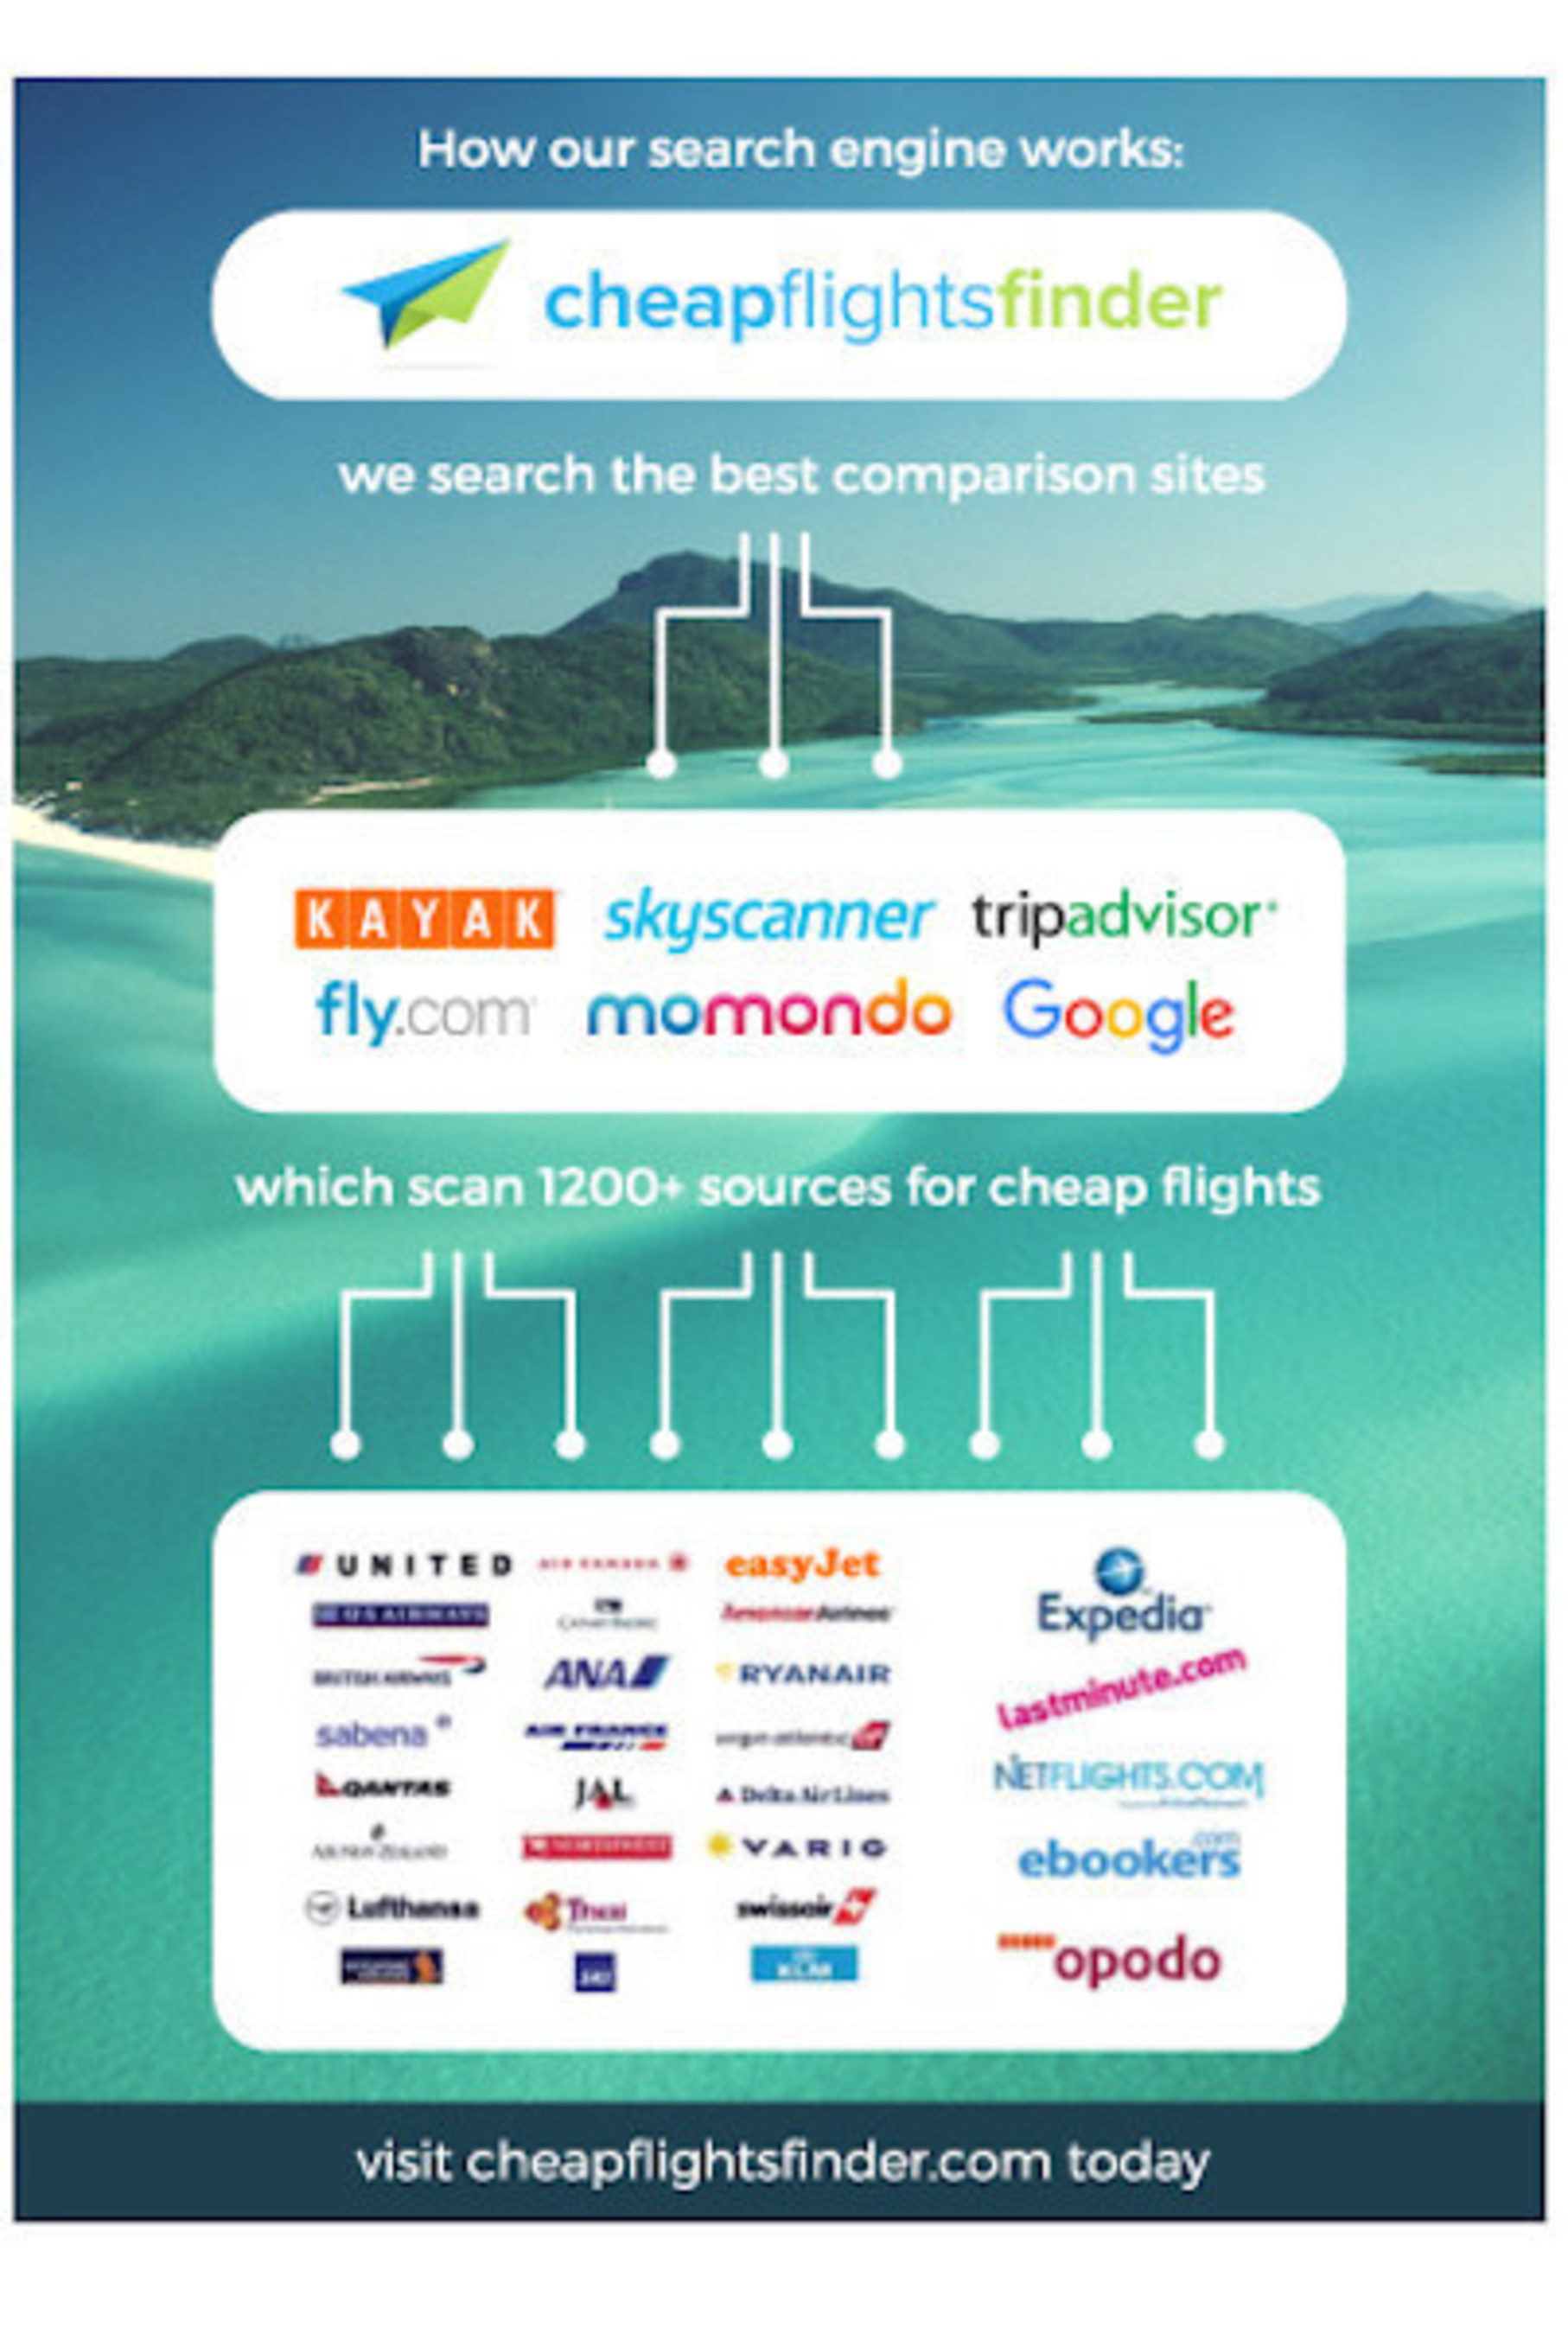 cheapflightsfinder introduces world s first meta meta flight search dashboard to instantly find rock bottom fares across leading comparison sites like google flights and kayak